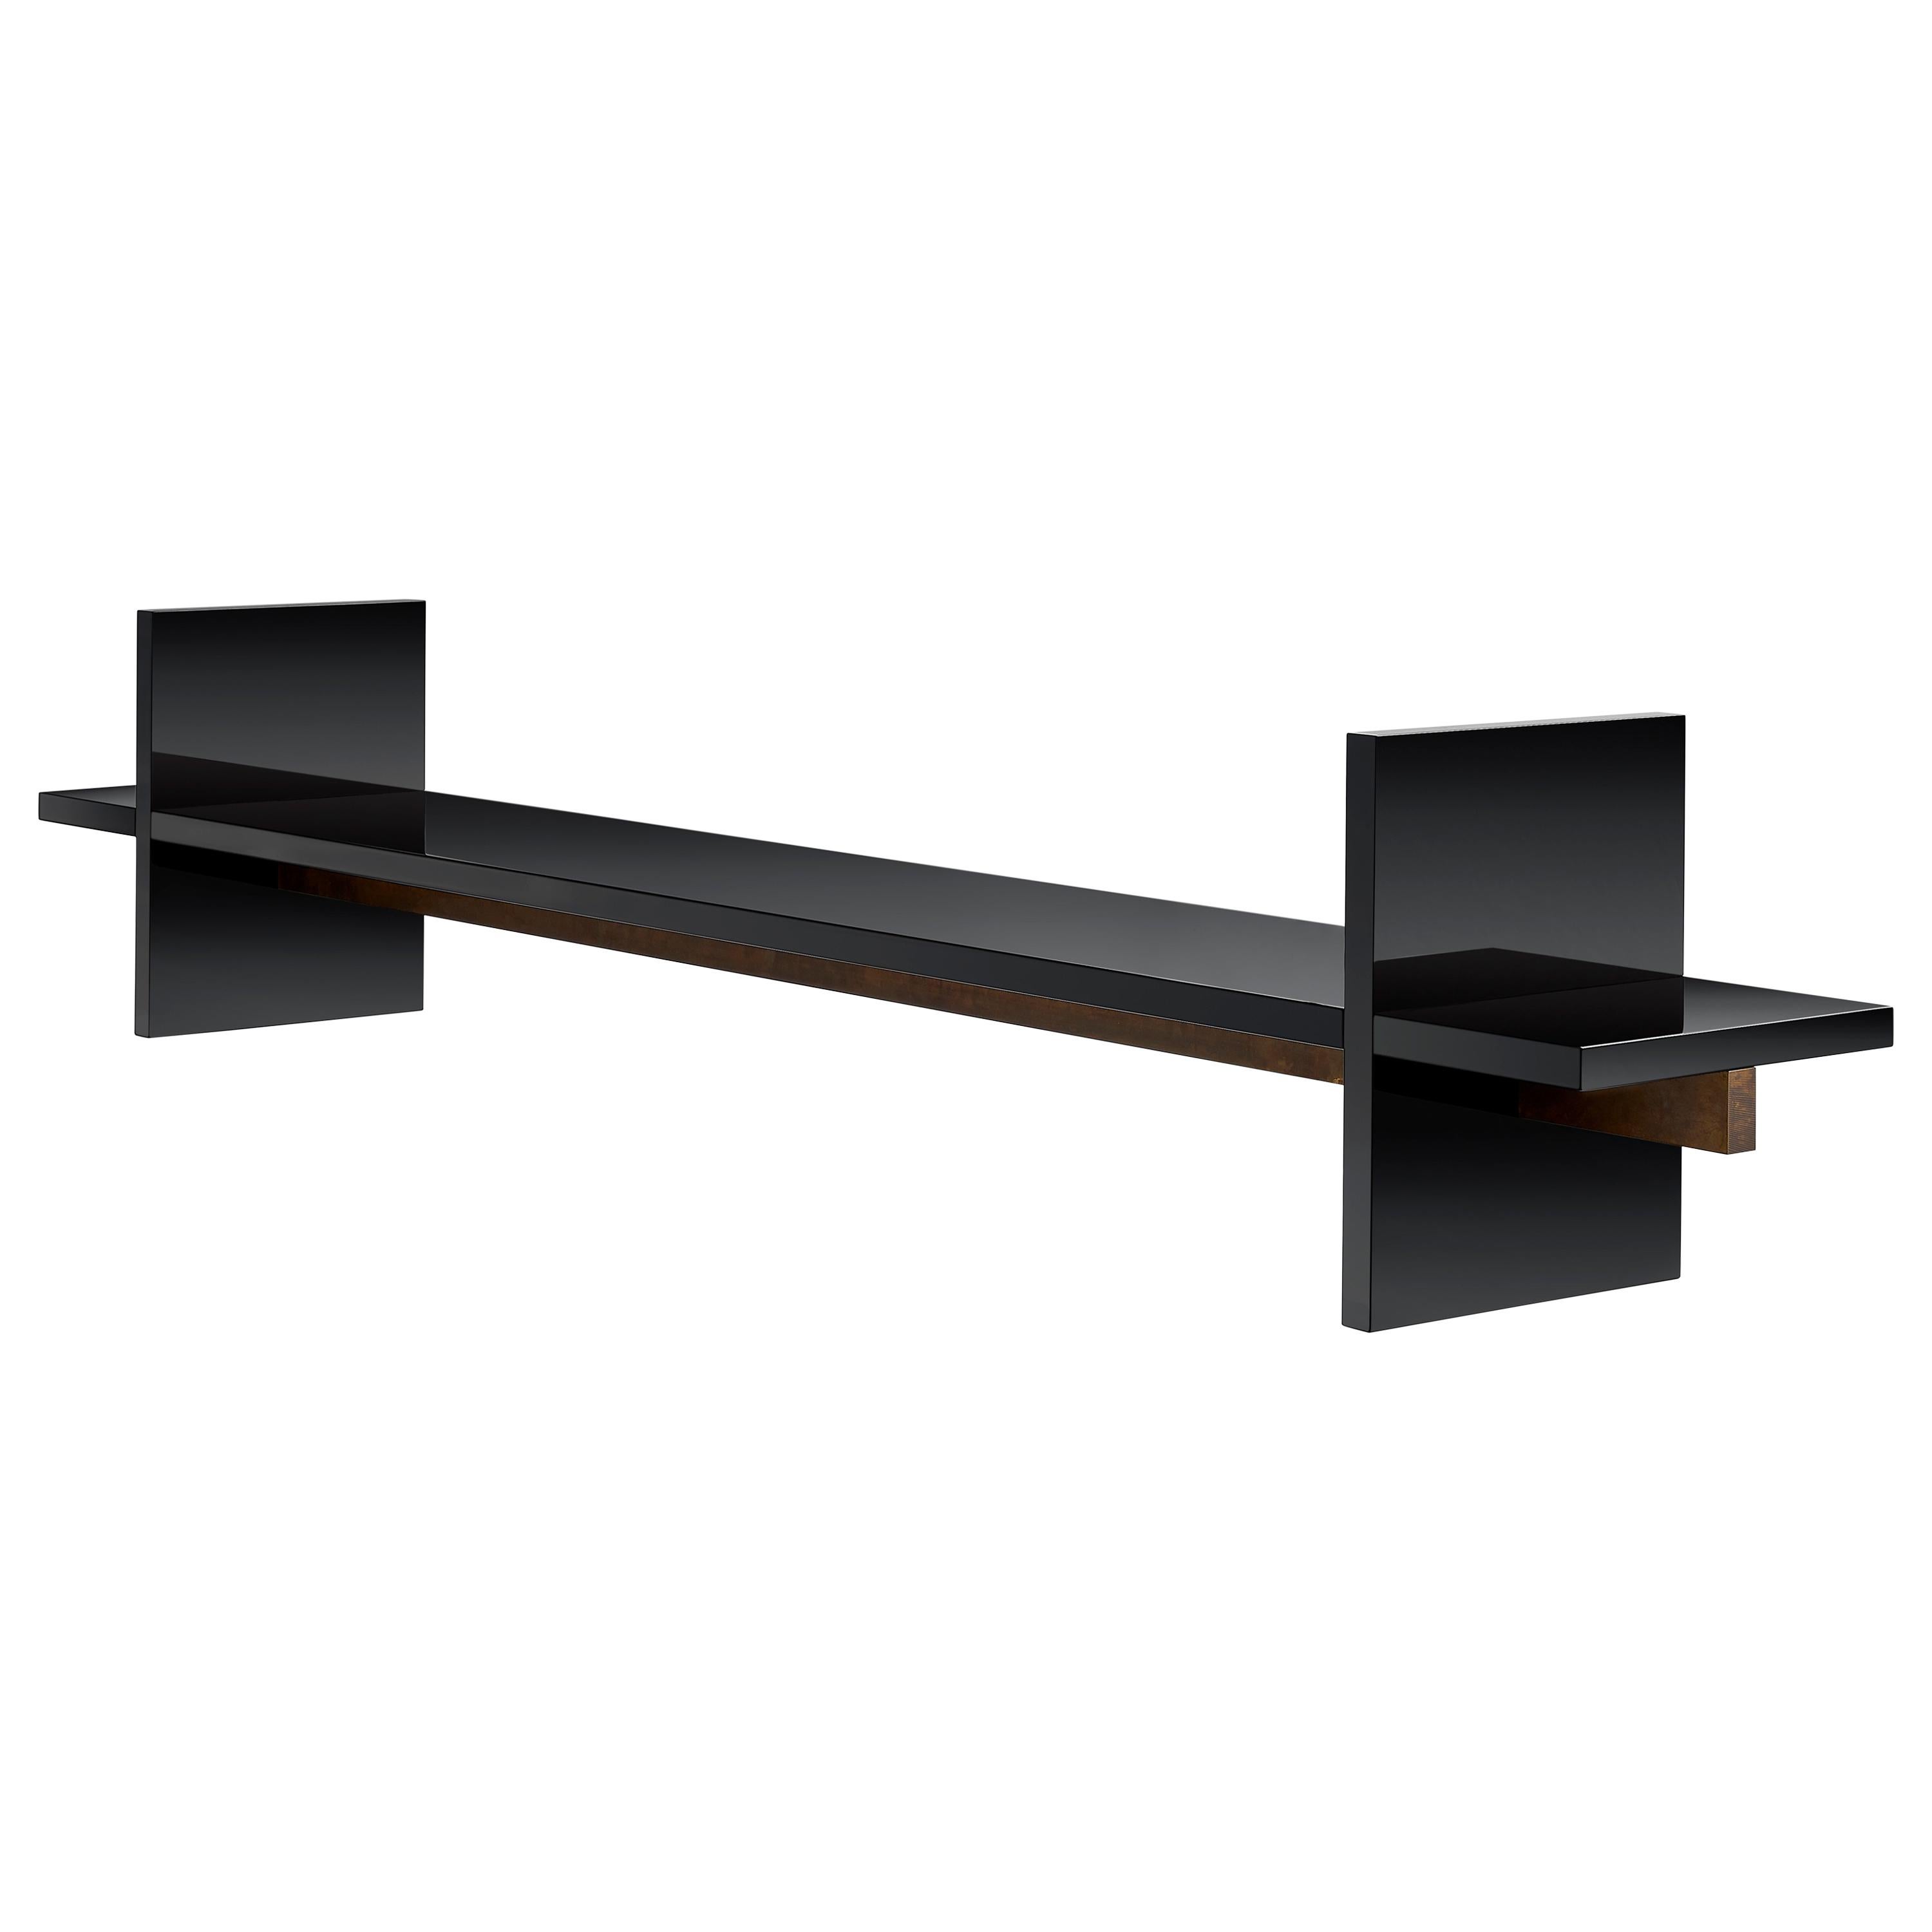 Ranya Sarakbi & Niko Koronis "NRB Bench" in Lacquer and Brass, Italy, 2019 For Sale